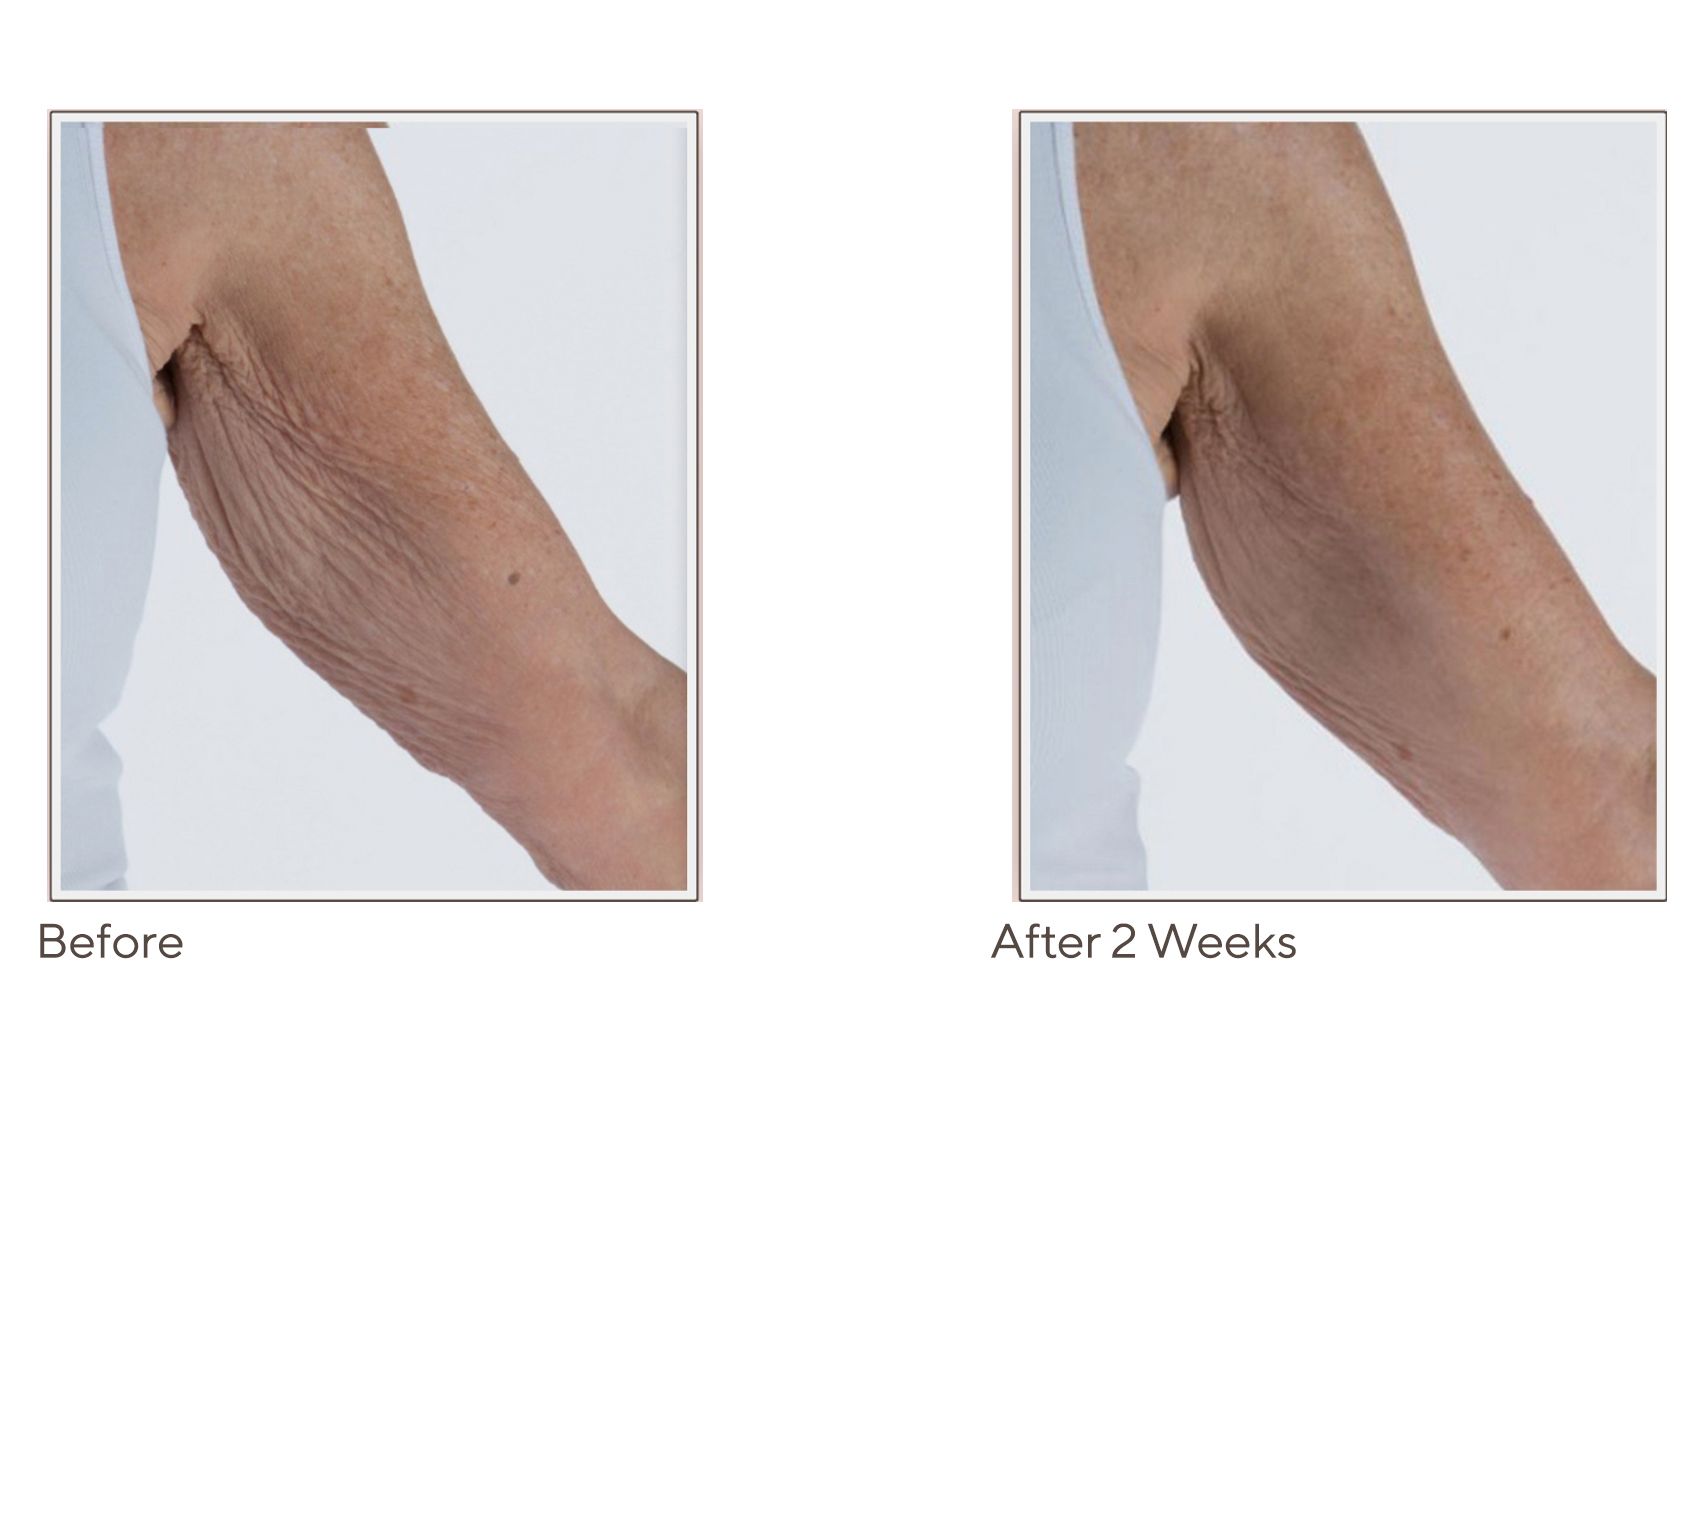 Crepe Erase Review  Does It Really Work? My 4-Week Transformation 